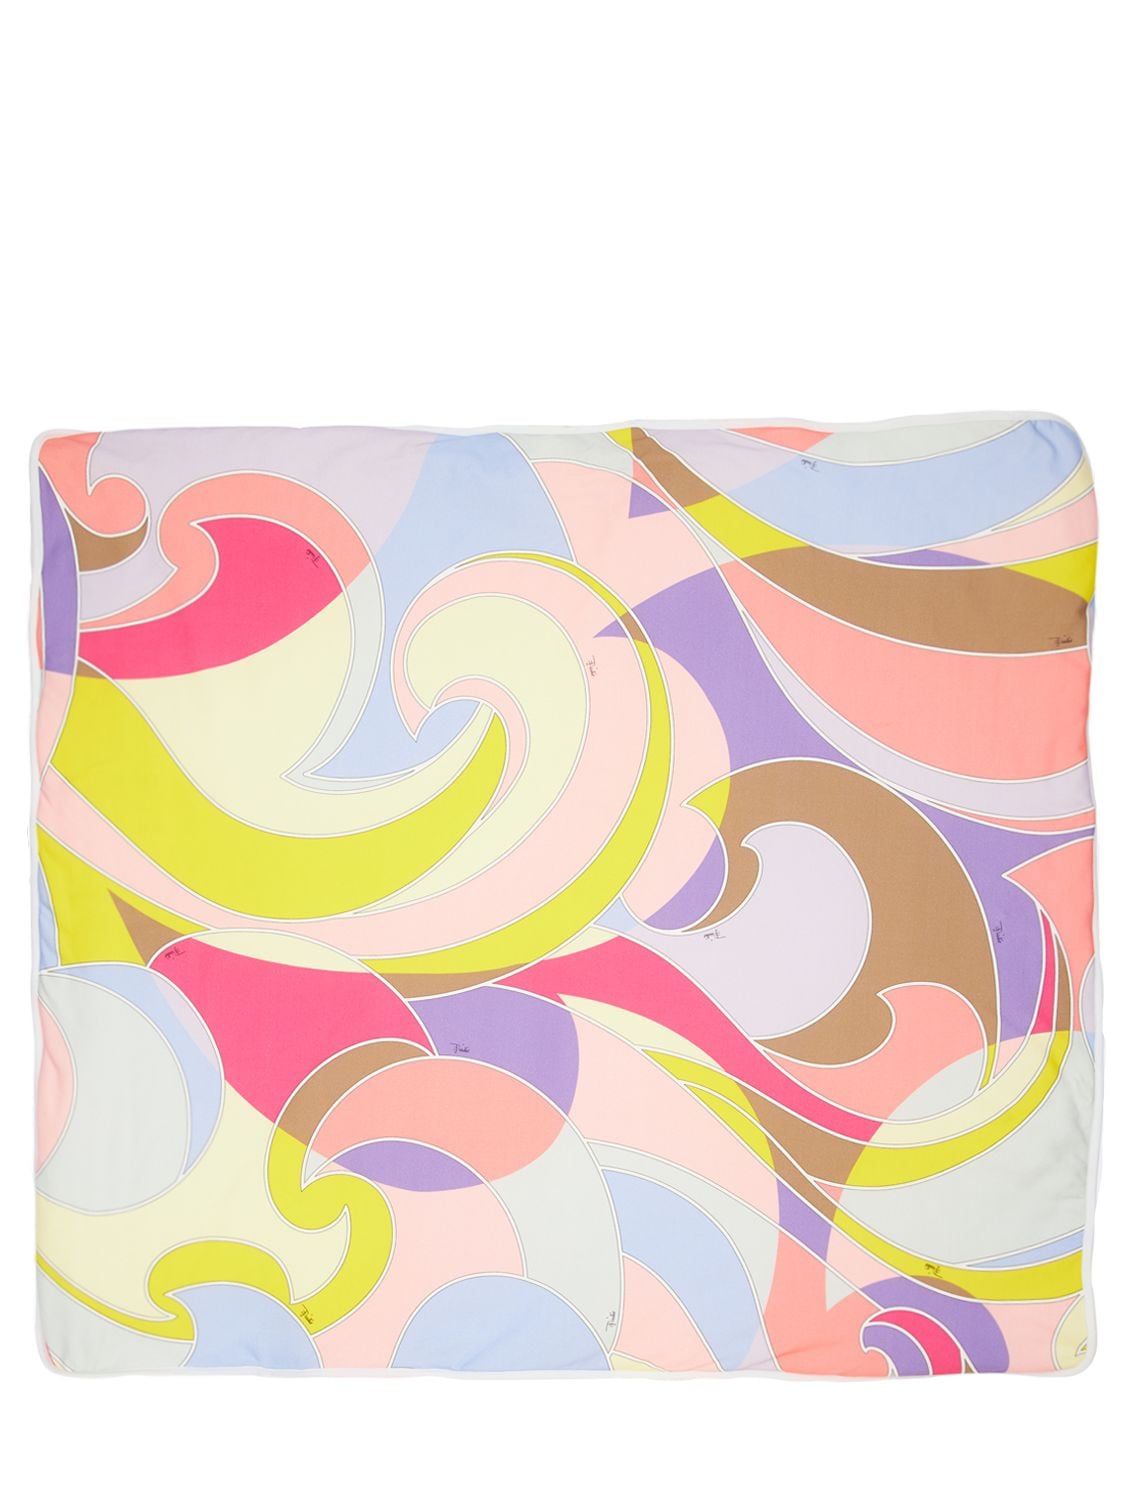 Emilio Pucci Kids' Printed Double Jersey Blanket In Multicolor